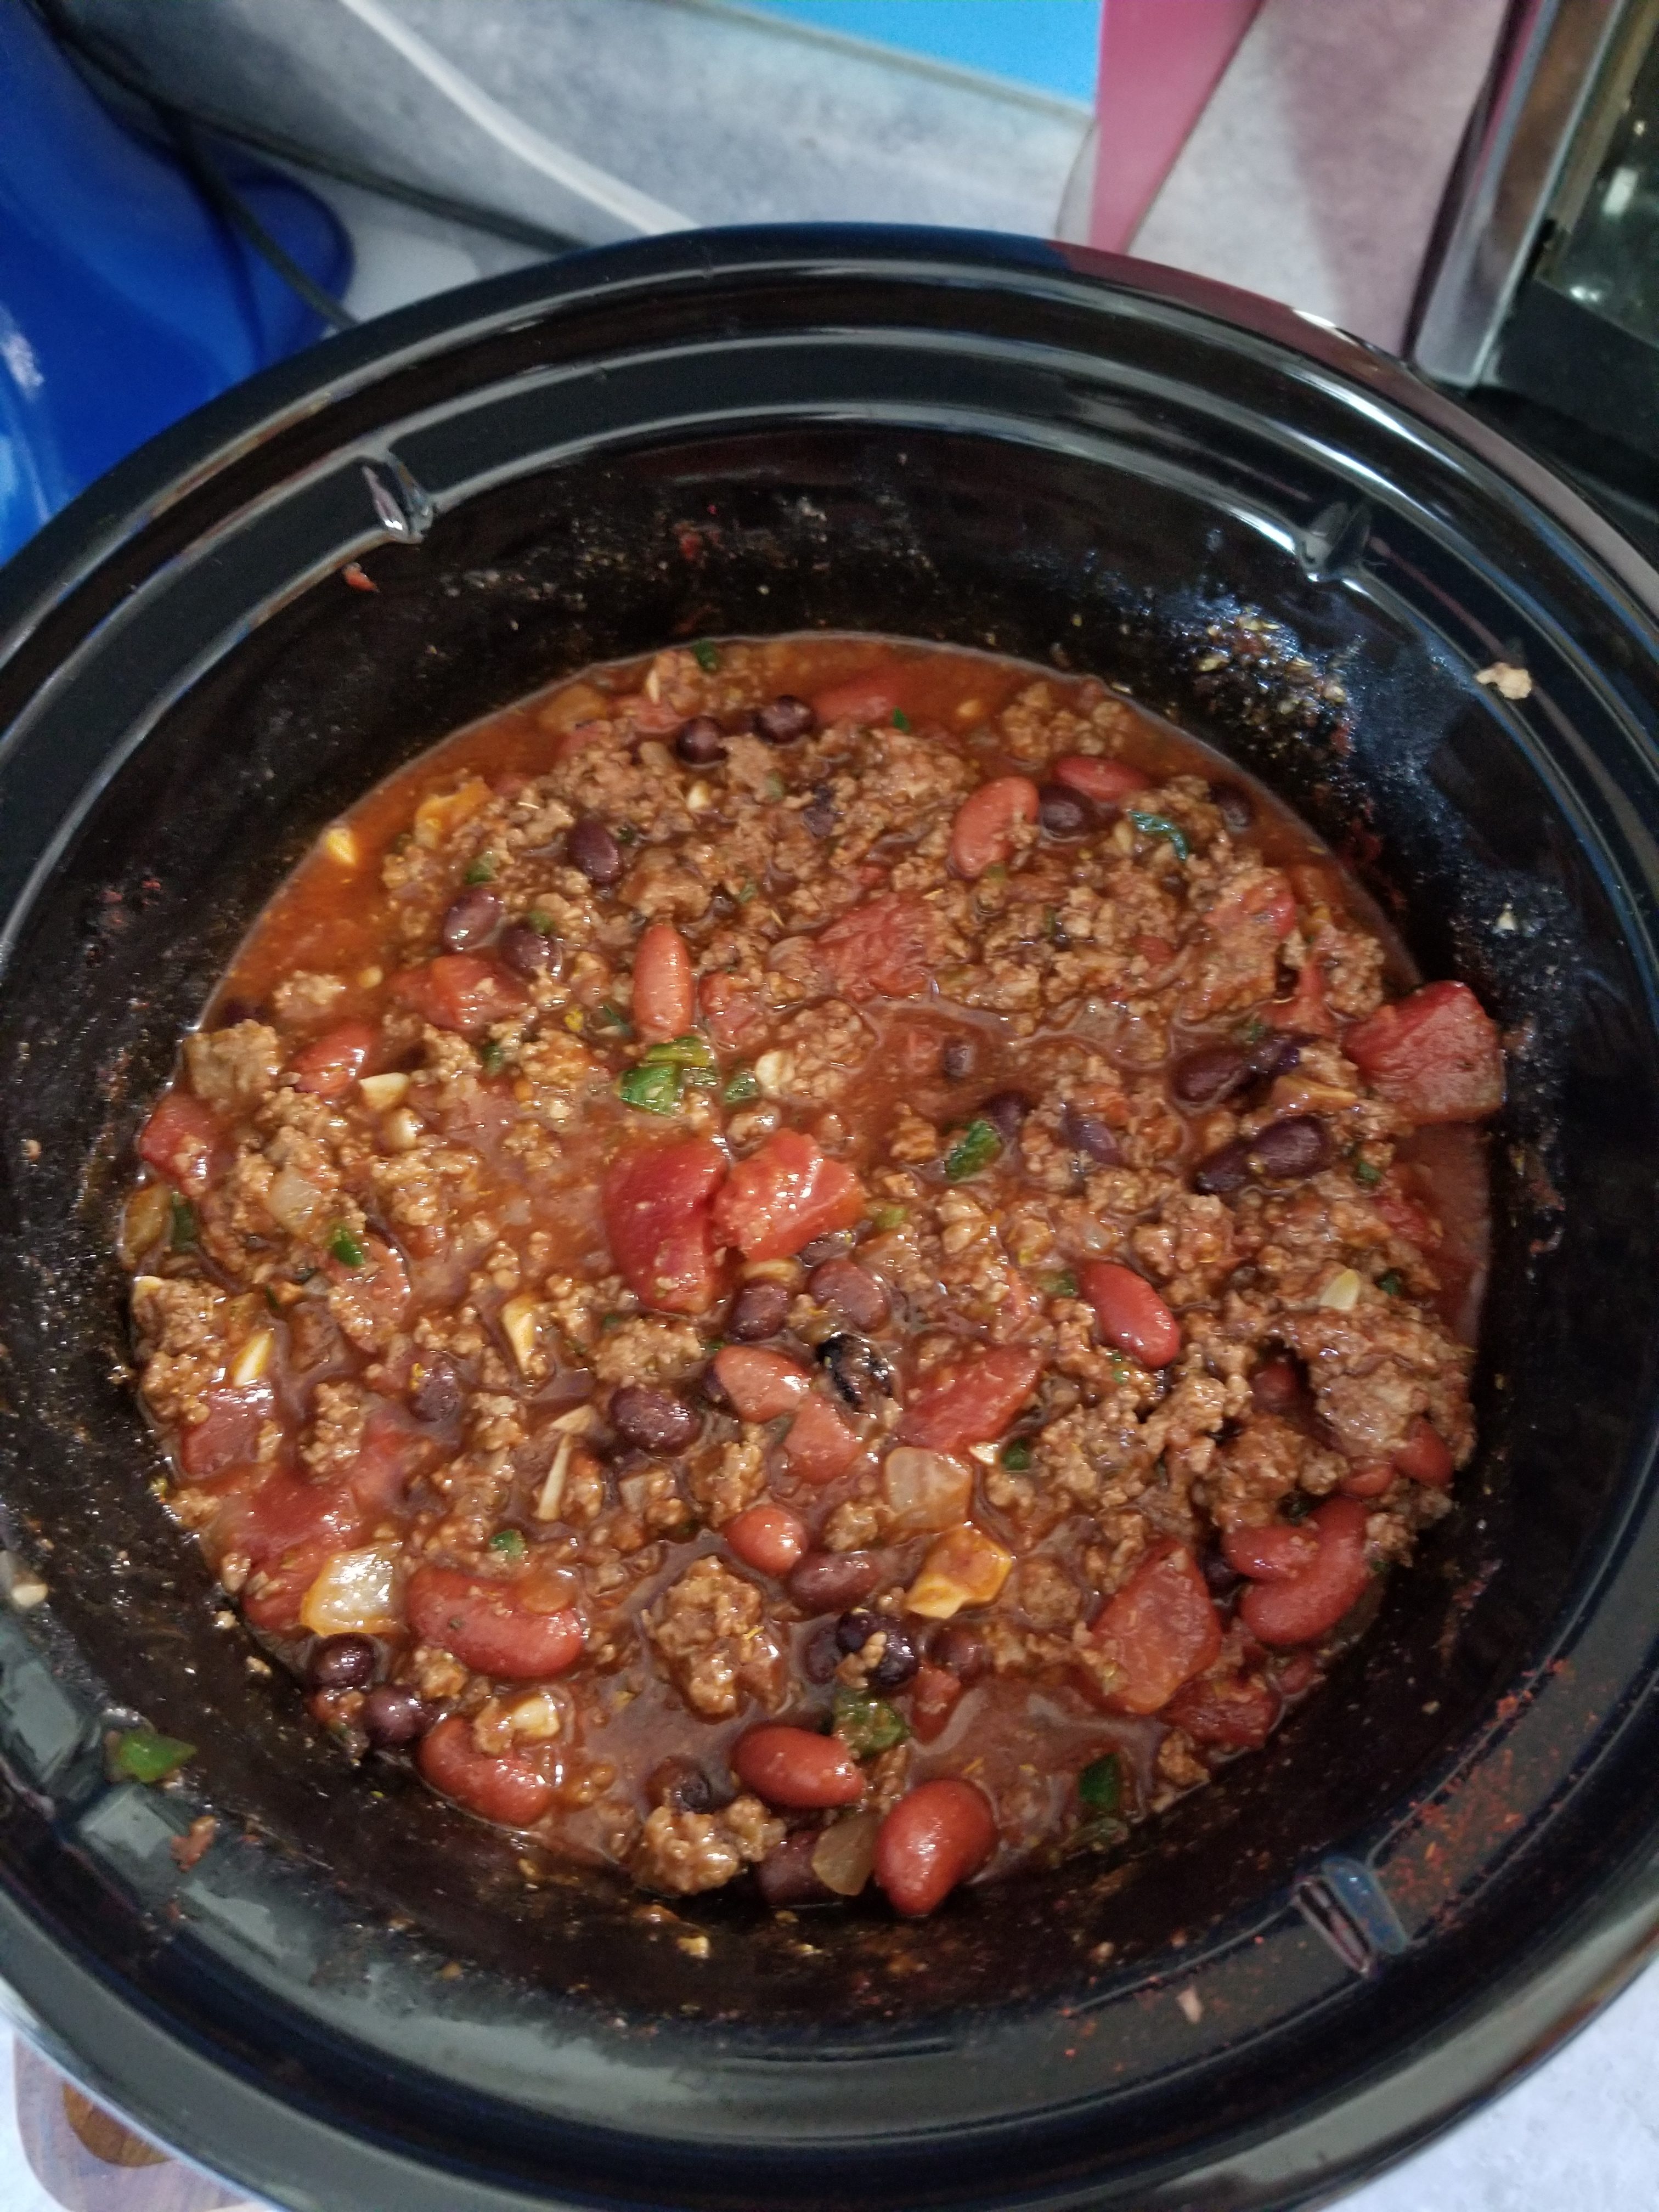 Sharon's Famous Chili - Member Recipes - Member Recipes | In-Depth Outdoors